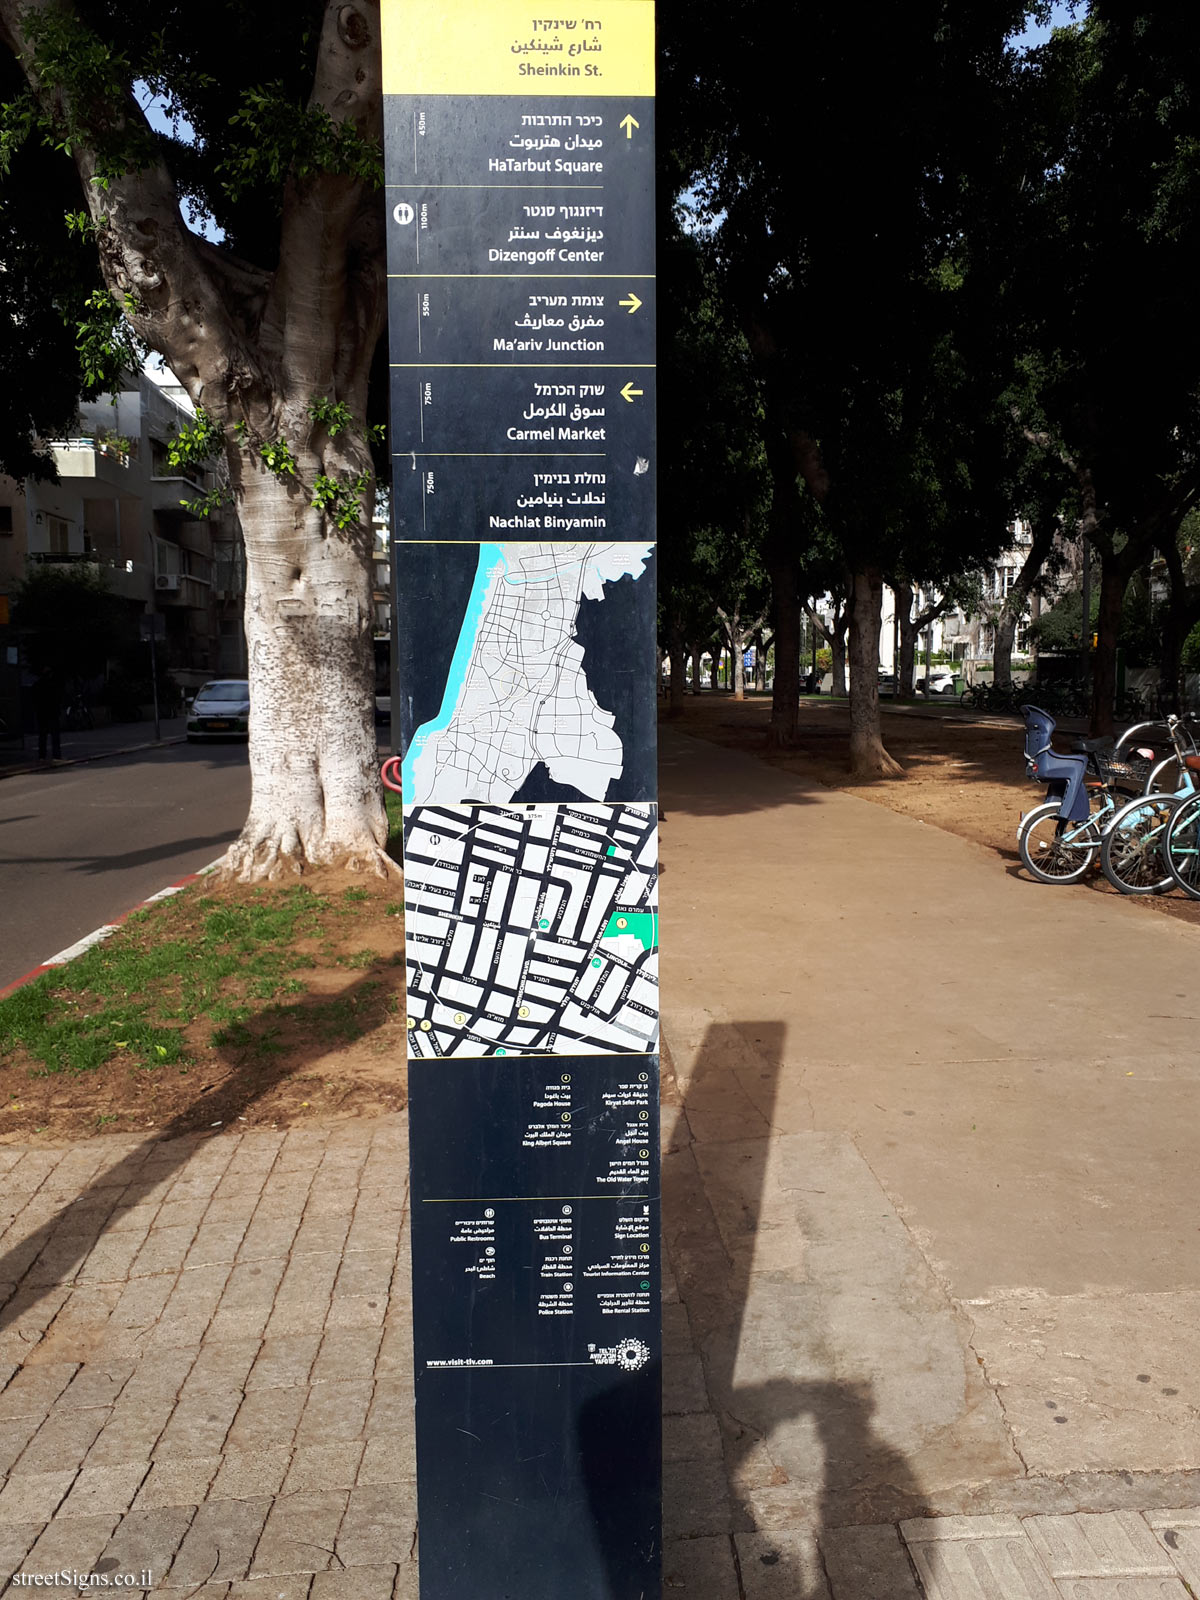 Tel Aviv -  Sheinkin Street (the other side of the sign)